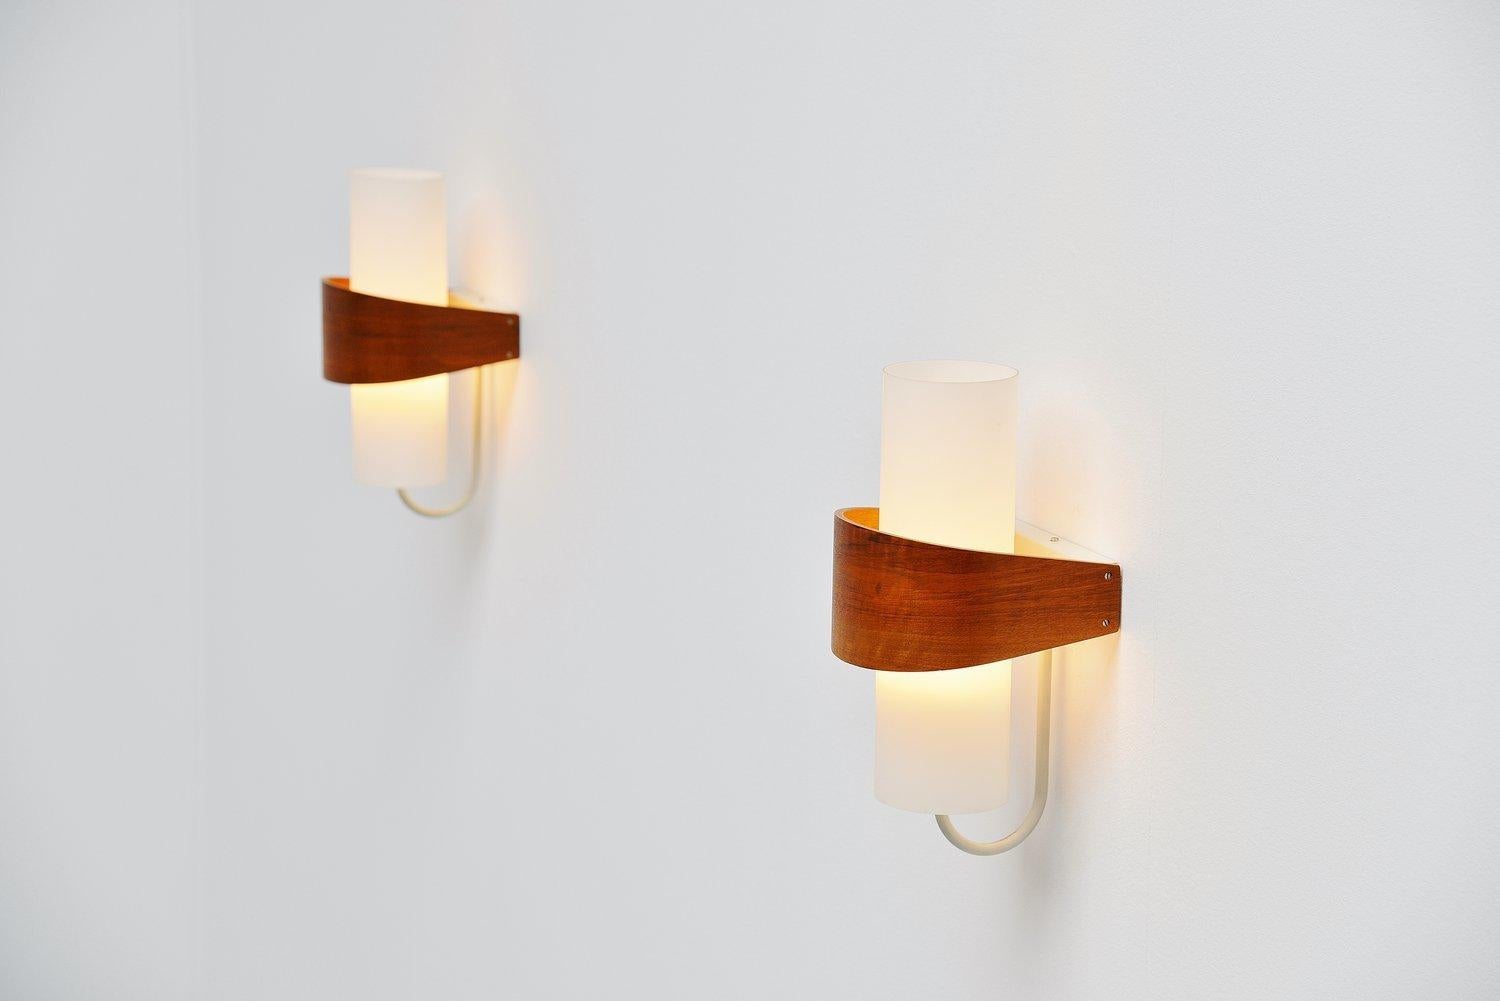 Very nice sconces designed by Belgian designer Louis Christiaan Kalff for Philips, Holland, 1959. These sconces have a very nice combination of materials, teak wood, frosted glass and white lacquered metal. All combined into this beautiful lamp